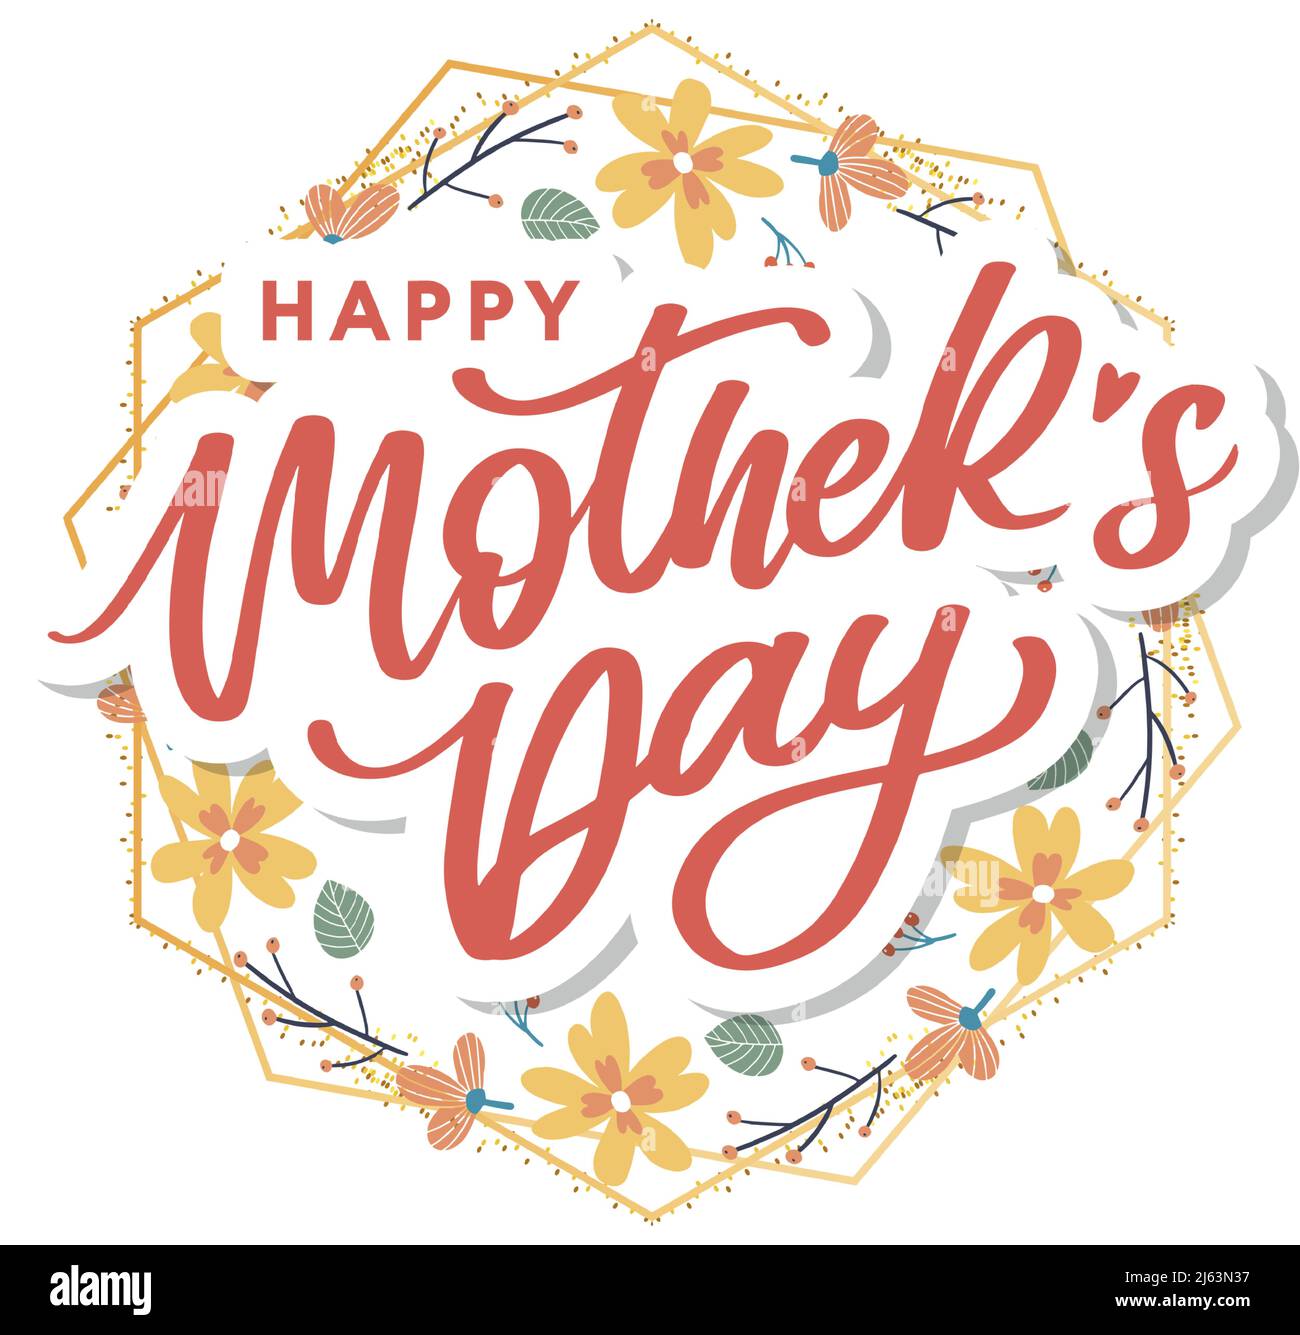 Happy Mothers Day lettering. Handmade calligraphy vector illustration. Mother's day card flowers Stock Vector